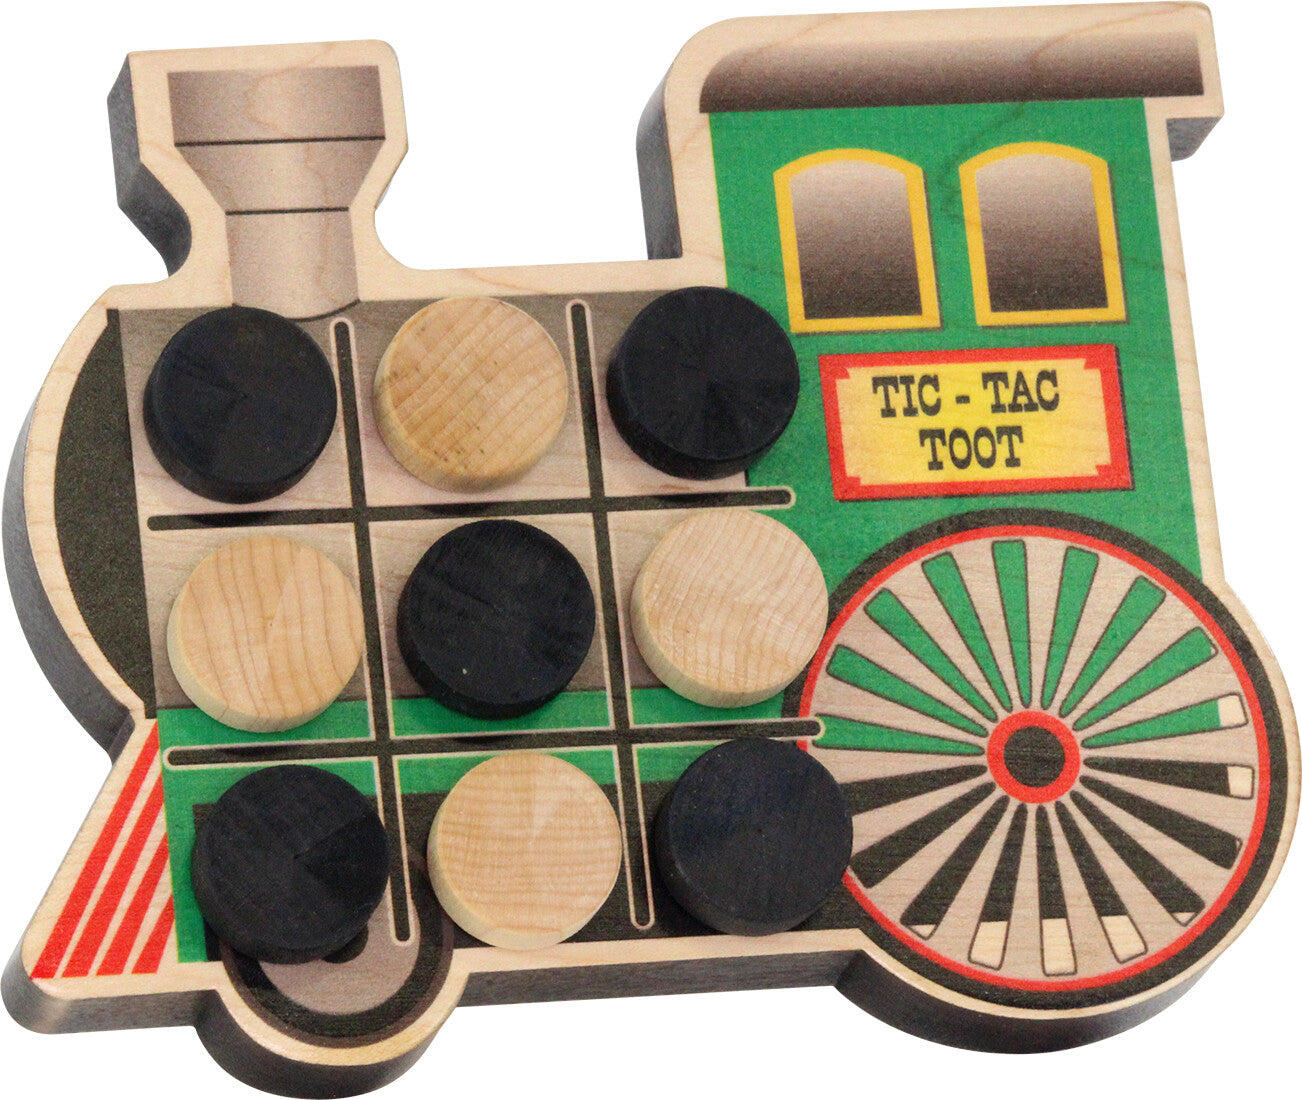 Tic-Tac-Toot - Wooden Game